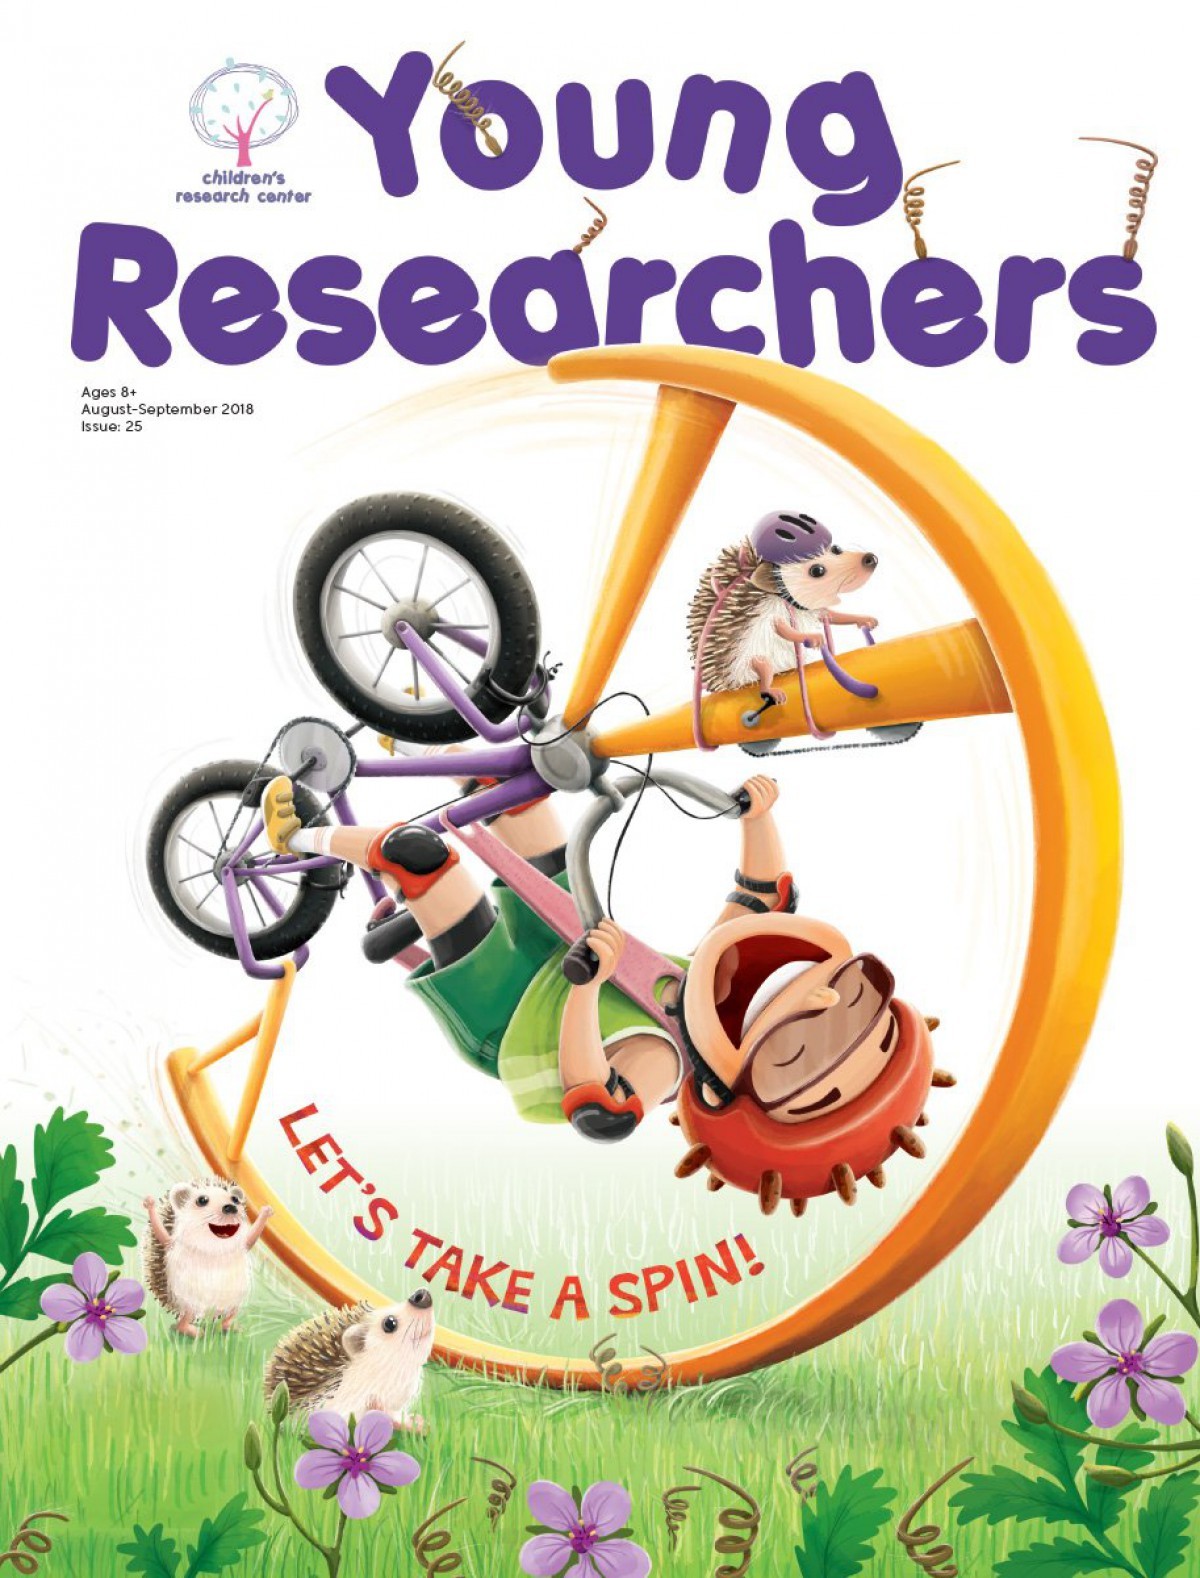 Young Researchers Issue 25: Let's Take A Spin!